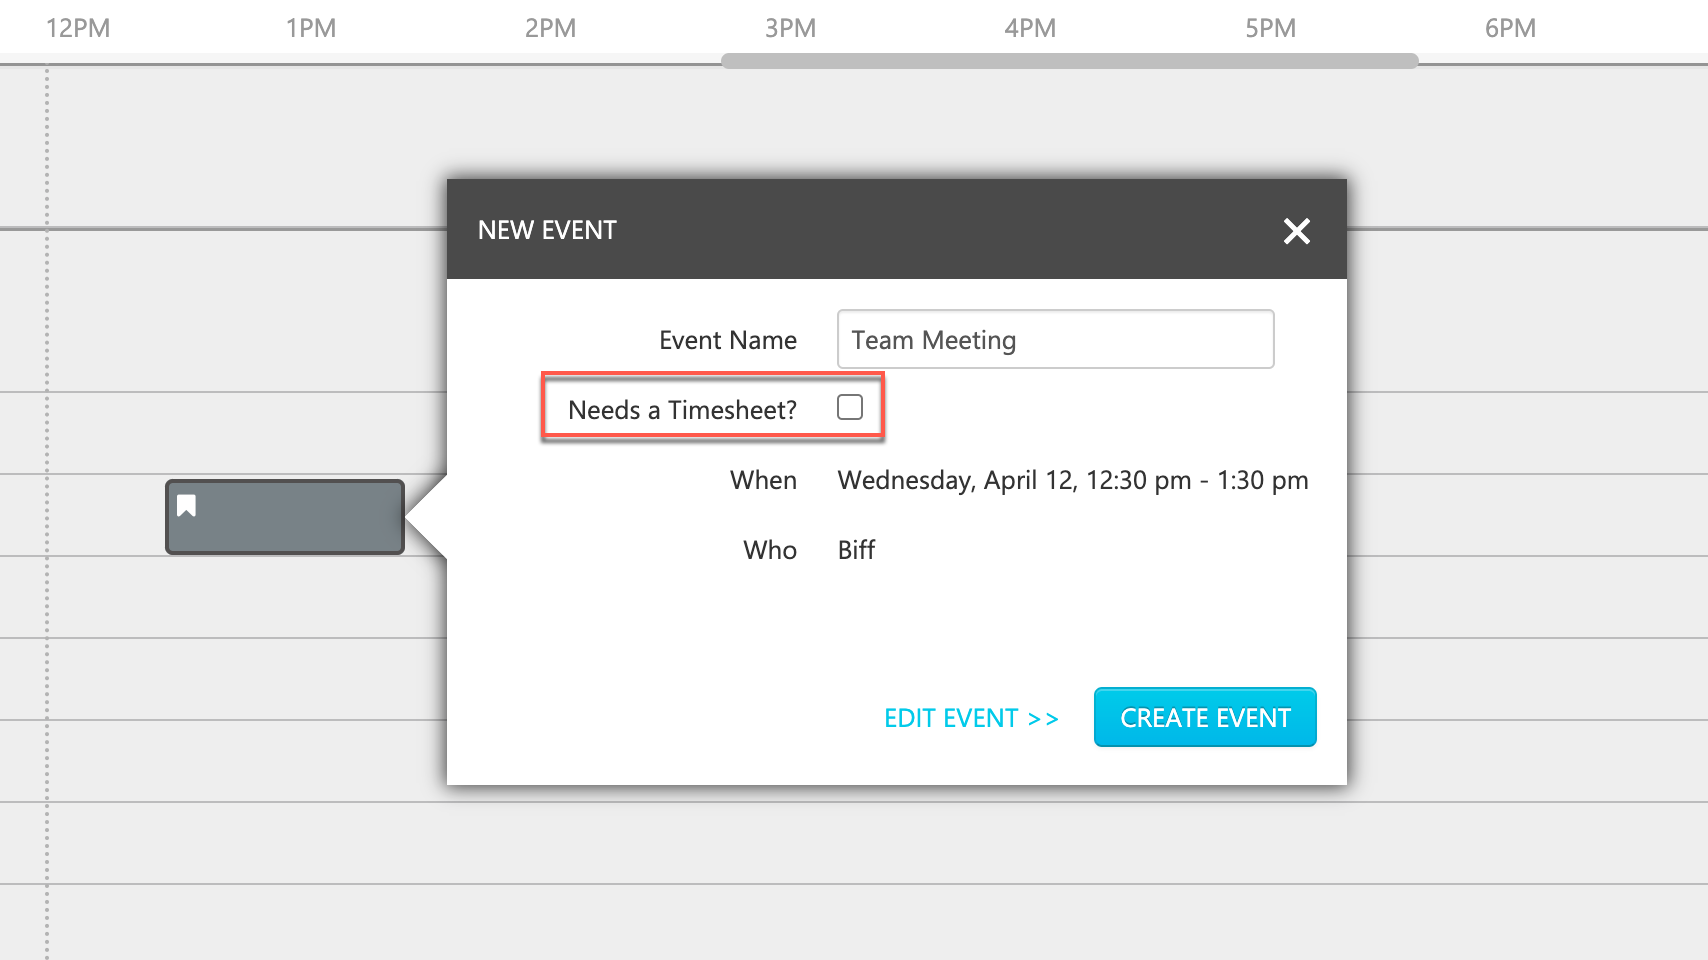 The New Event pop-up on the ServiceTitan Dispatch Board. The Needs a Timesheet? field is highlighted to show that the checkbox is deselected.